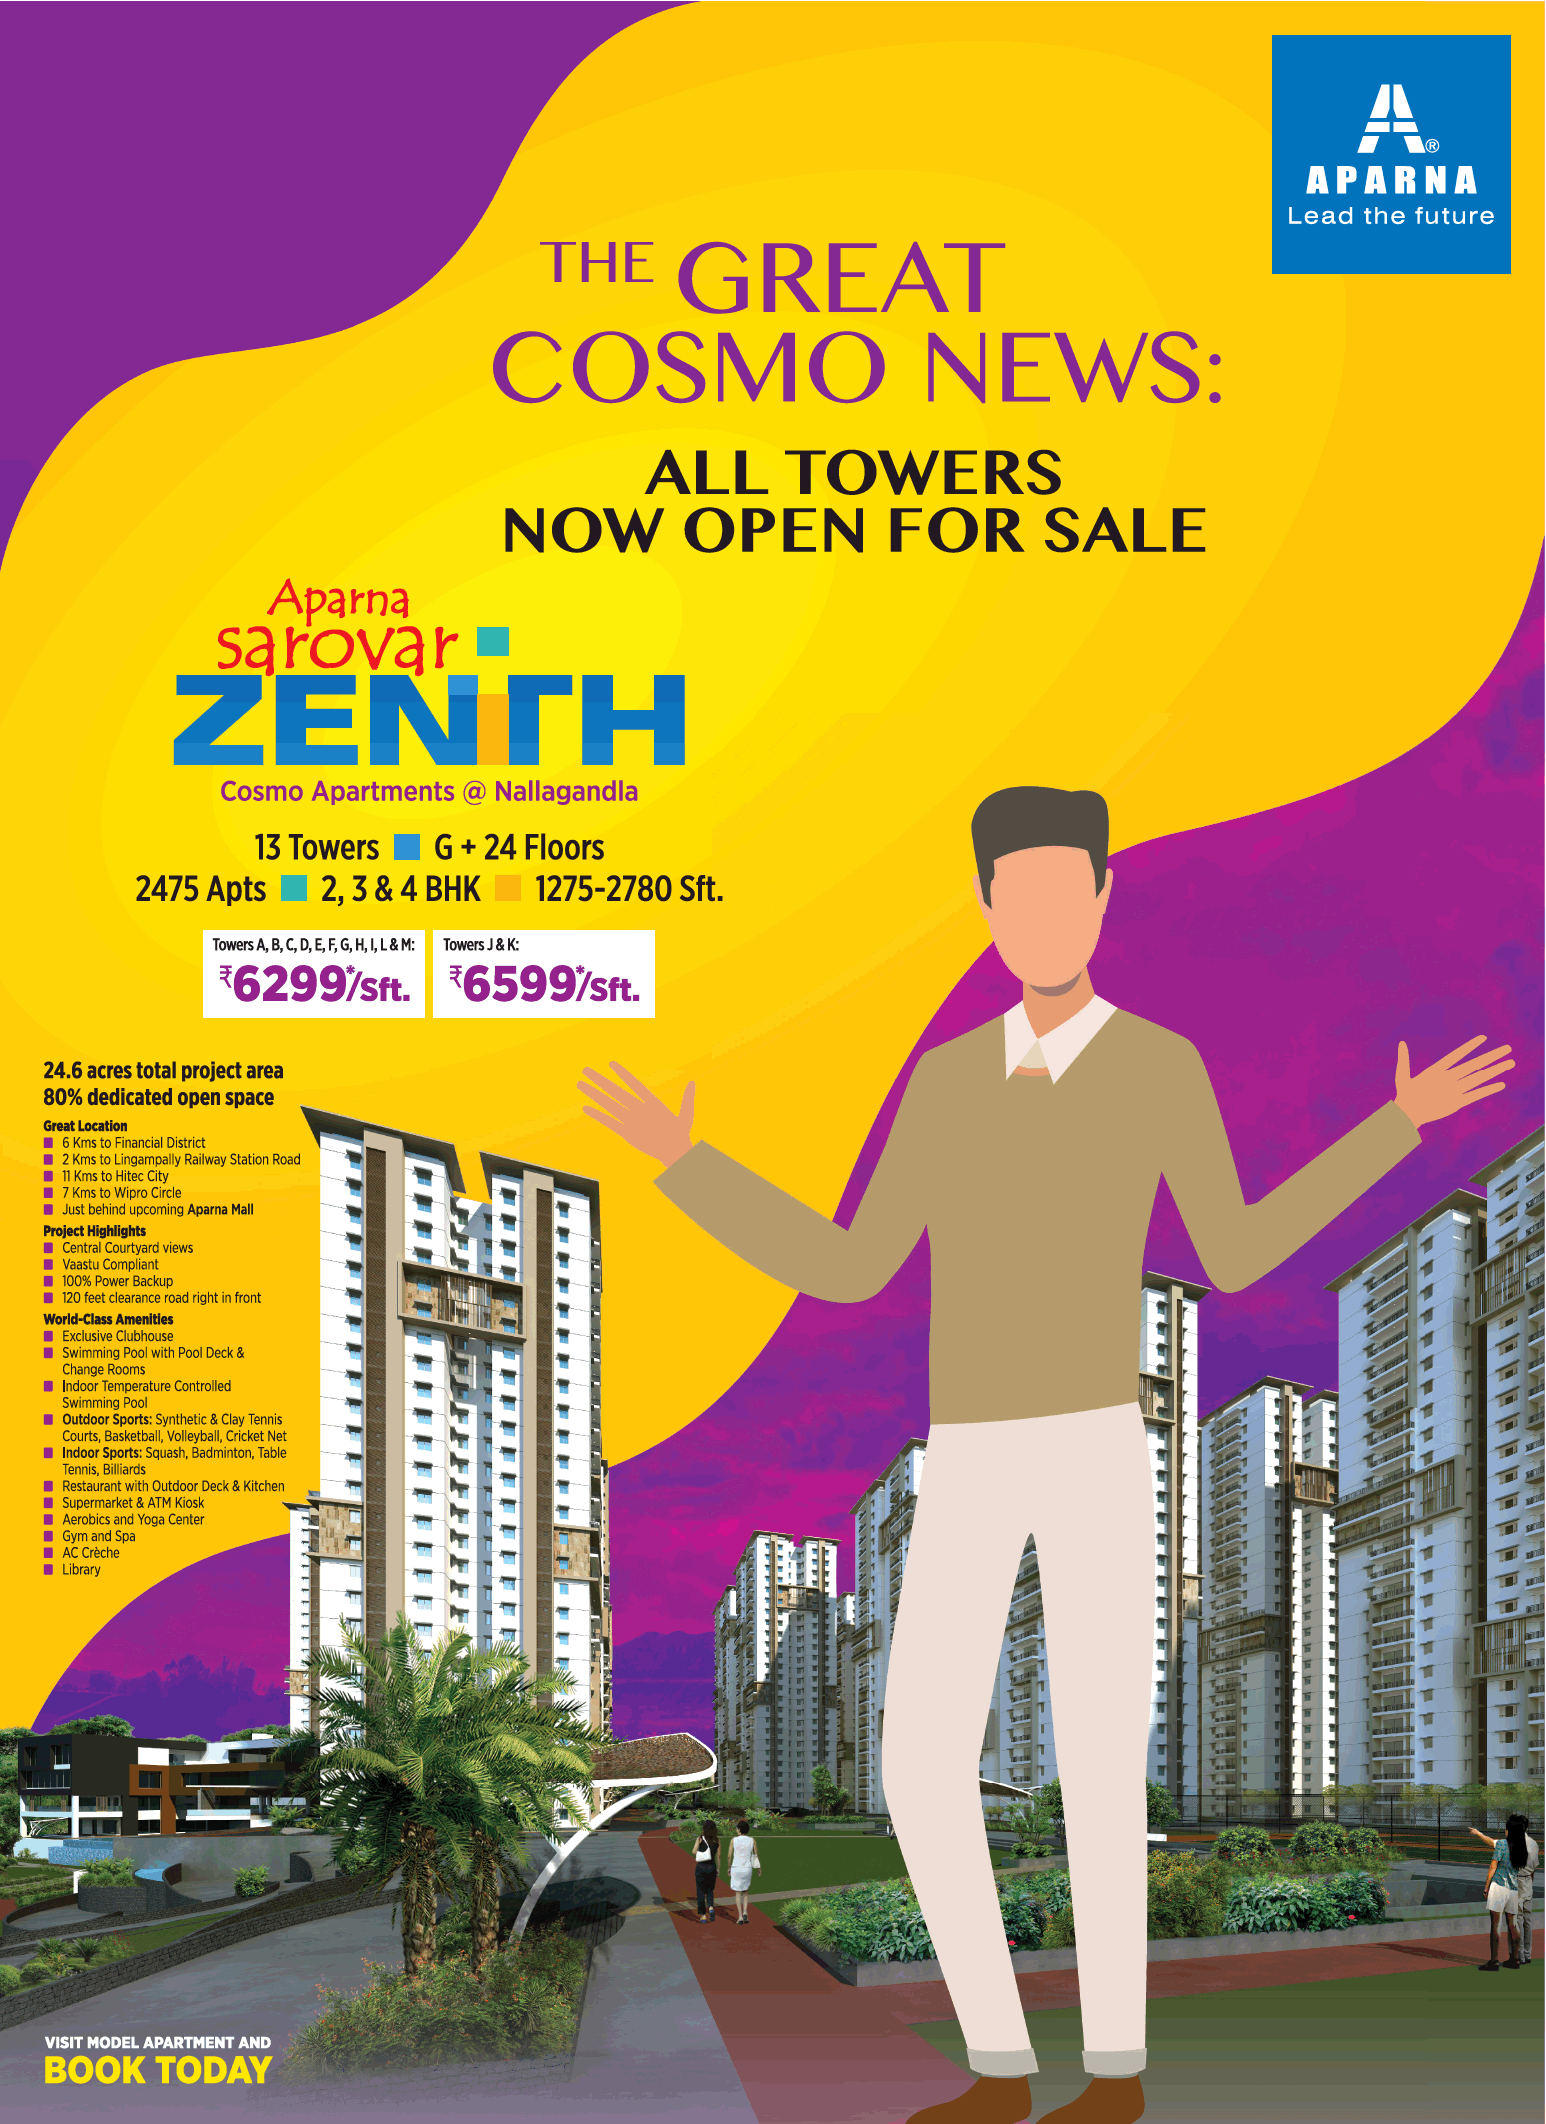 All towers now open for sale at Aparna Sarovar Zenith in Hyderabad